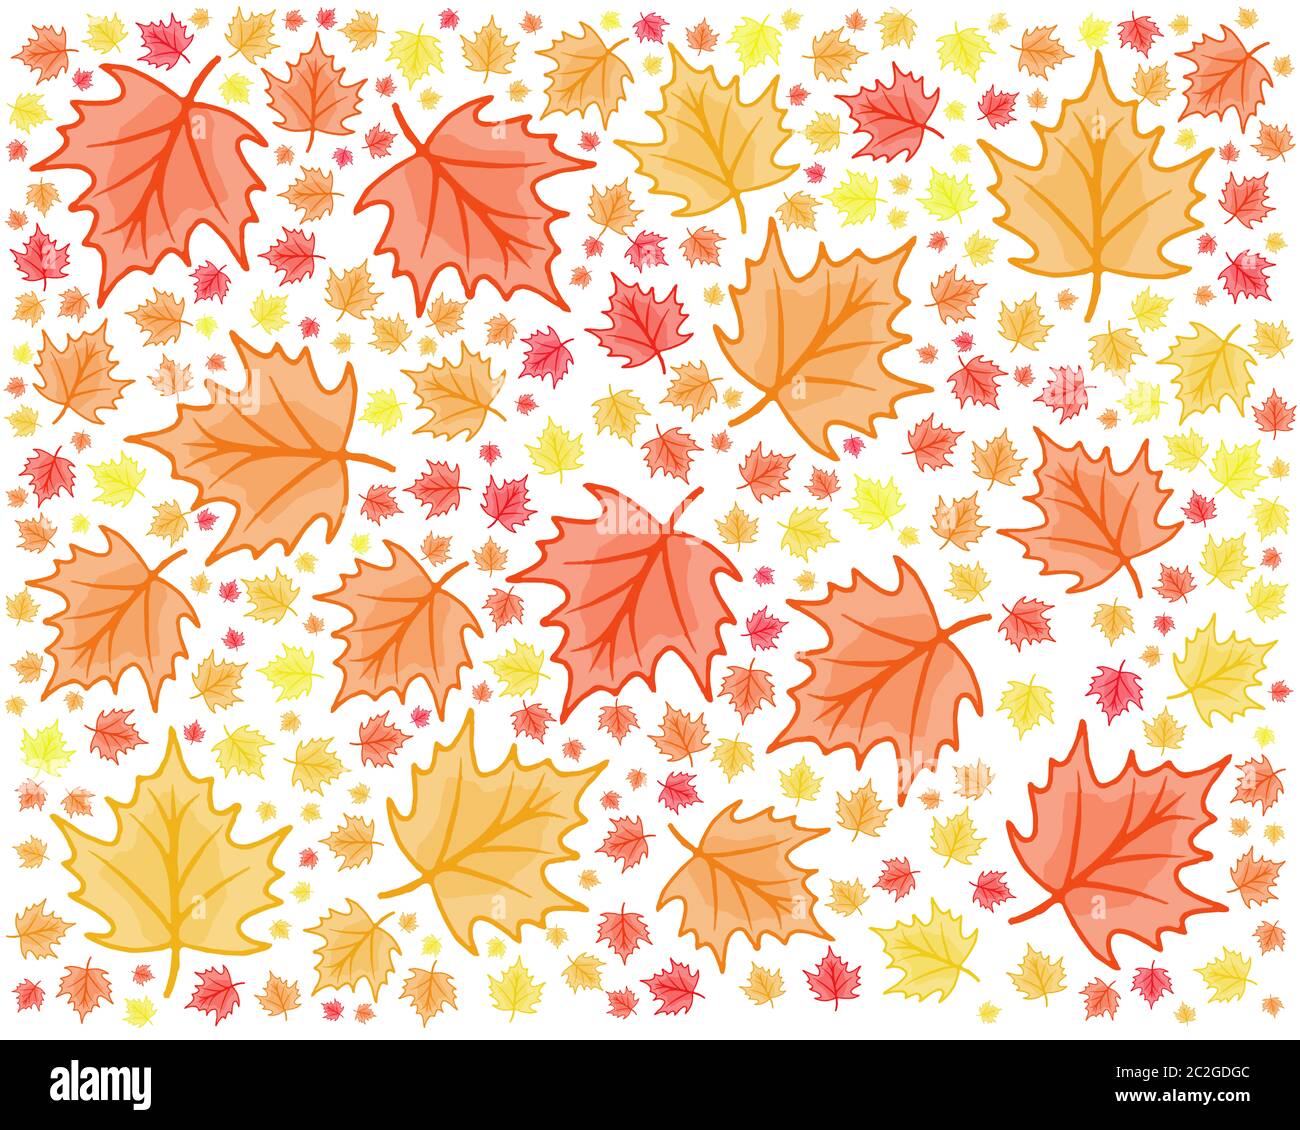 maple leaf red and yellow autumn themed modern seamless repeating design Stock Photo